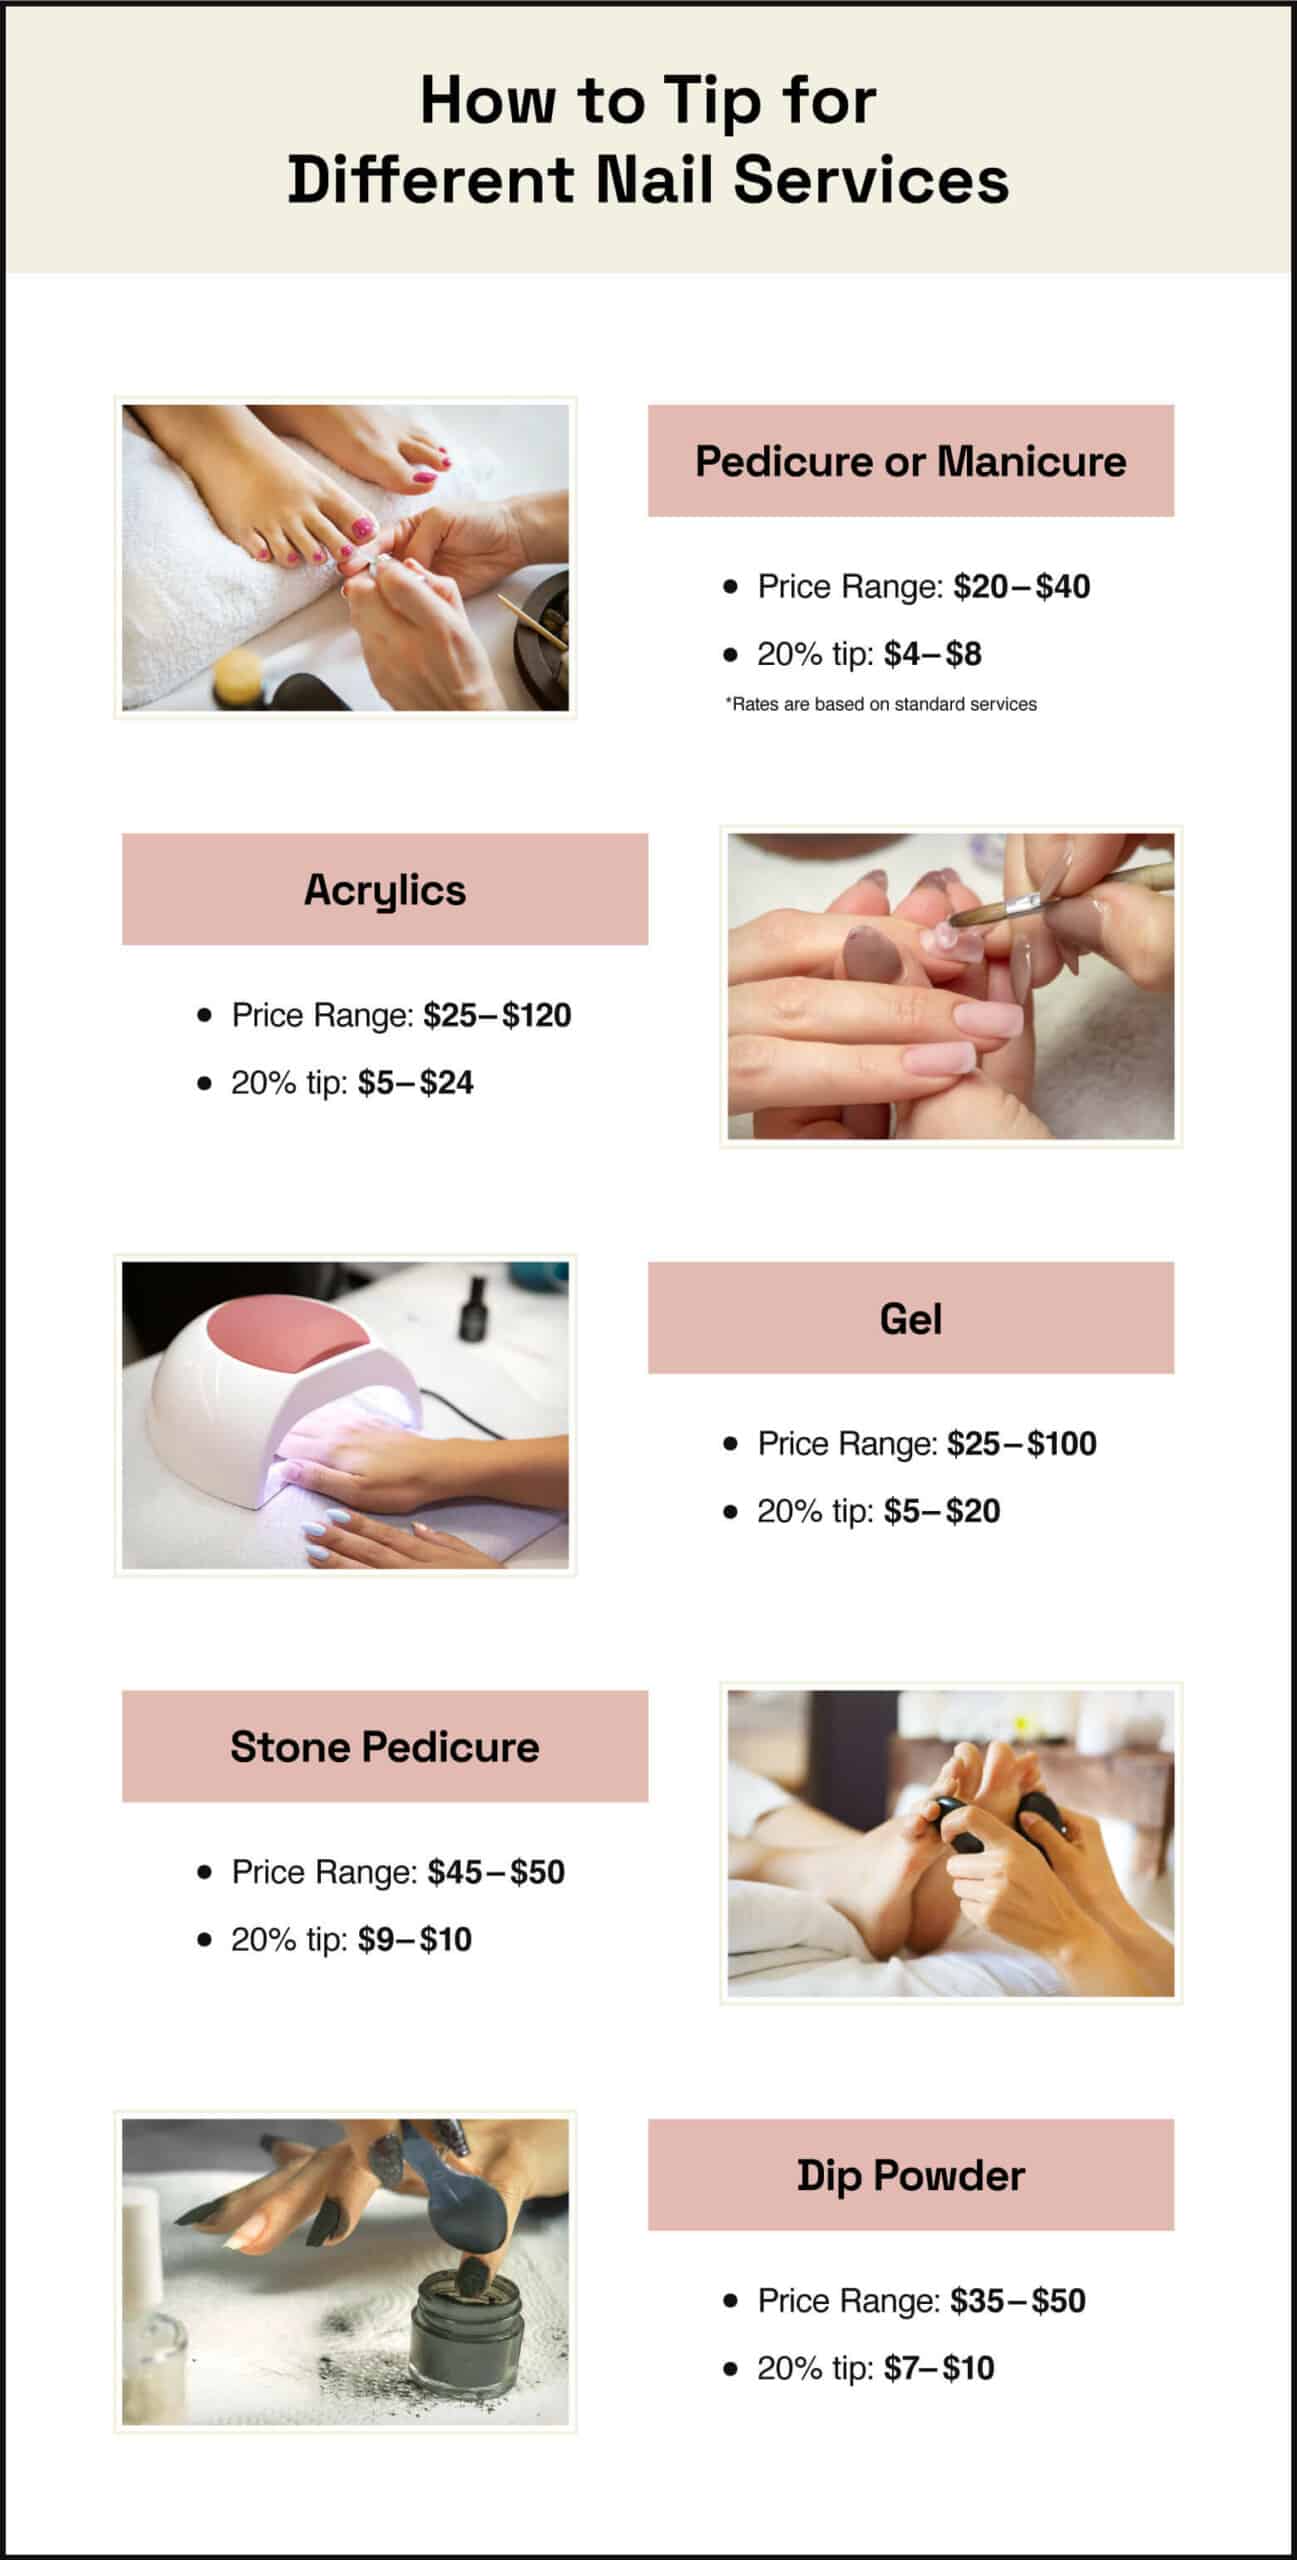 photos, prices ranges, and suggested tip amounts for different types of nail services